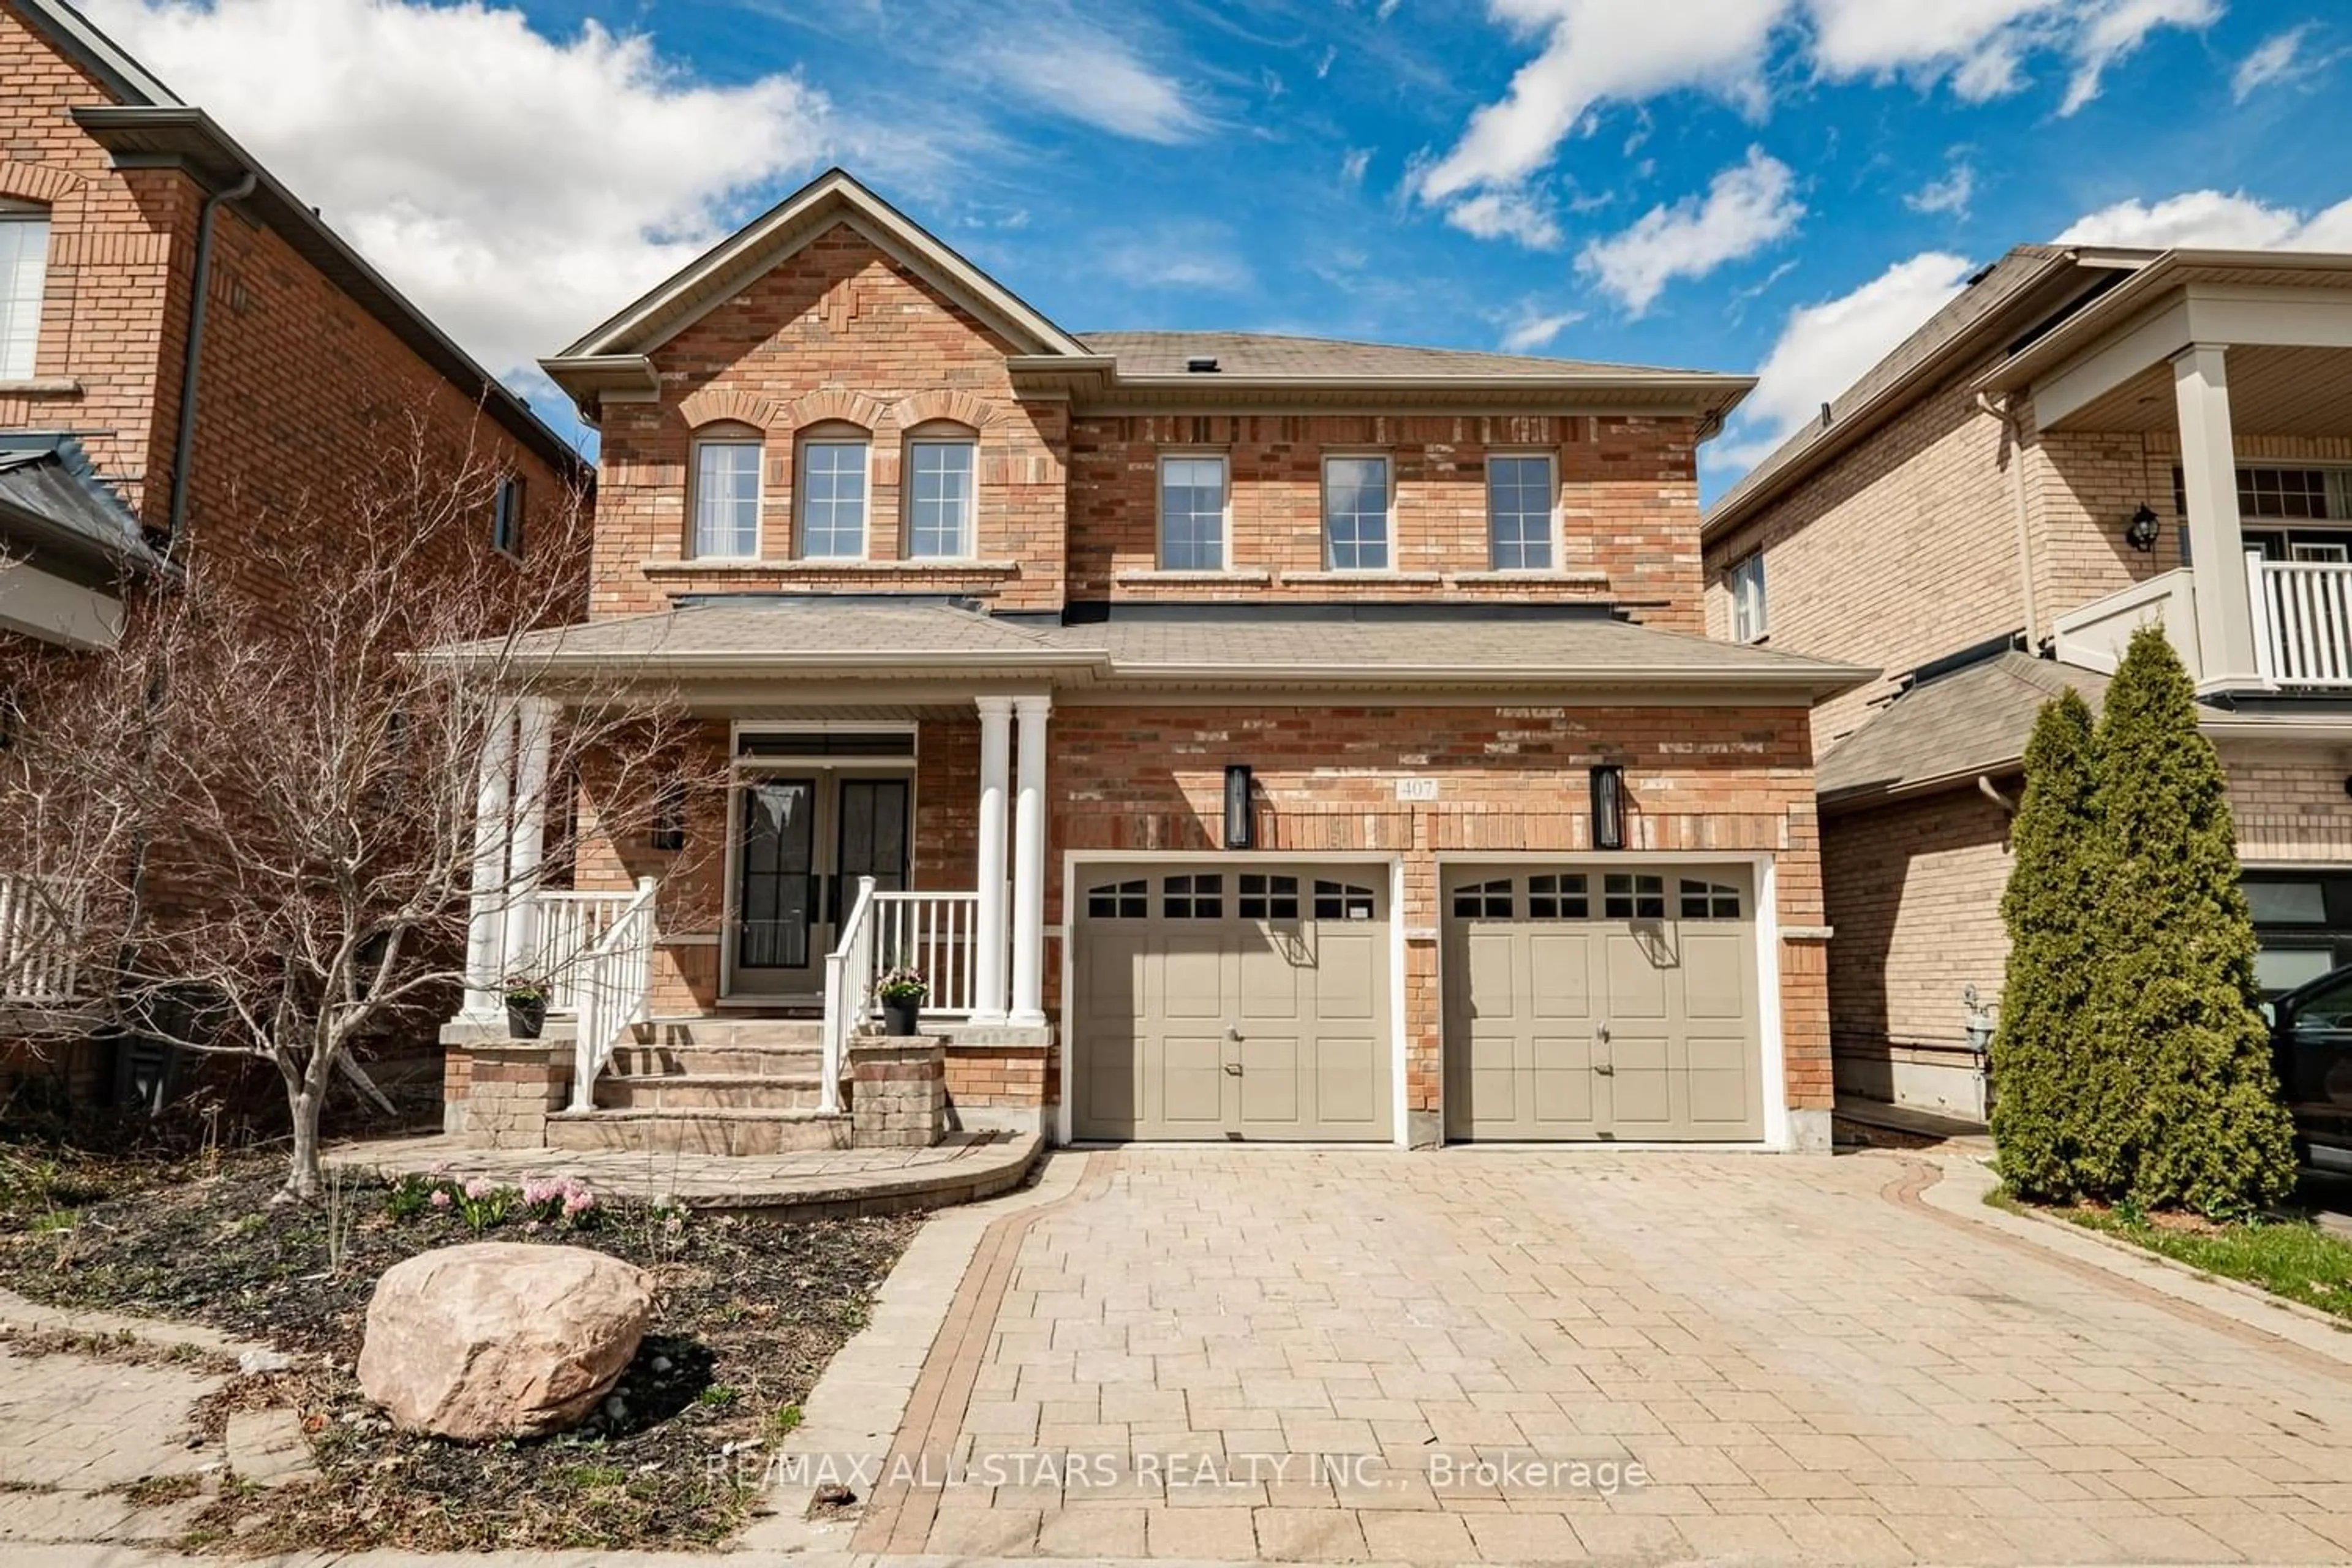 Home with brick exterior material for 407 Mantle Ave, Whitchurch-Stouffville Ontario L4A 0S1